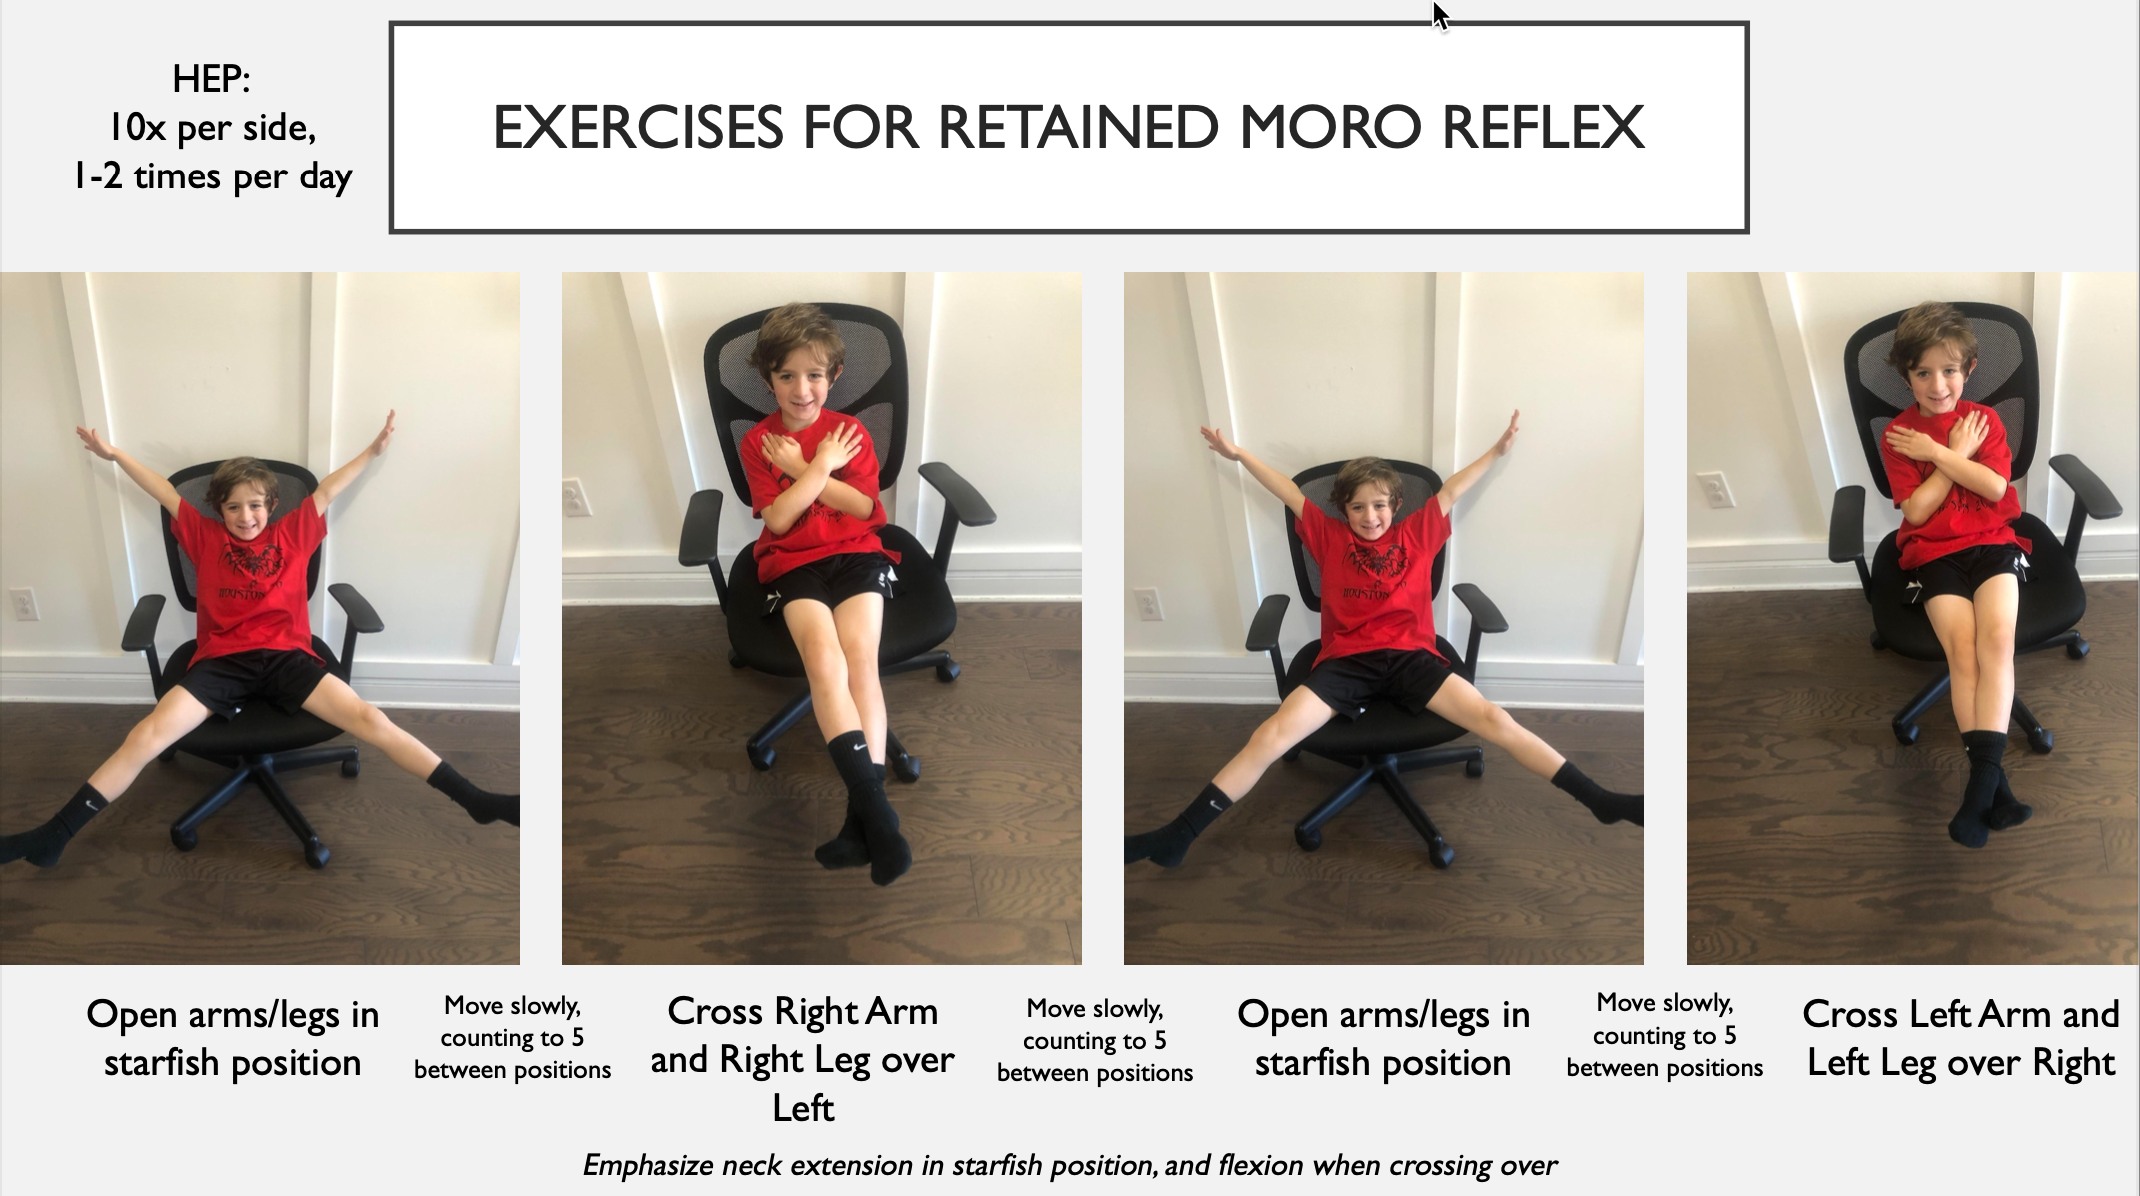 Exercises for a retained Moro reflex